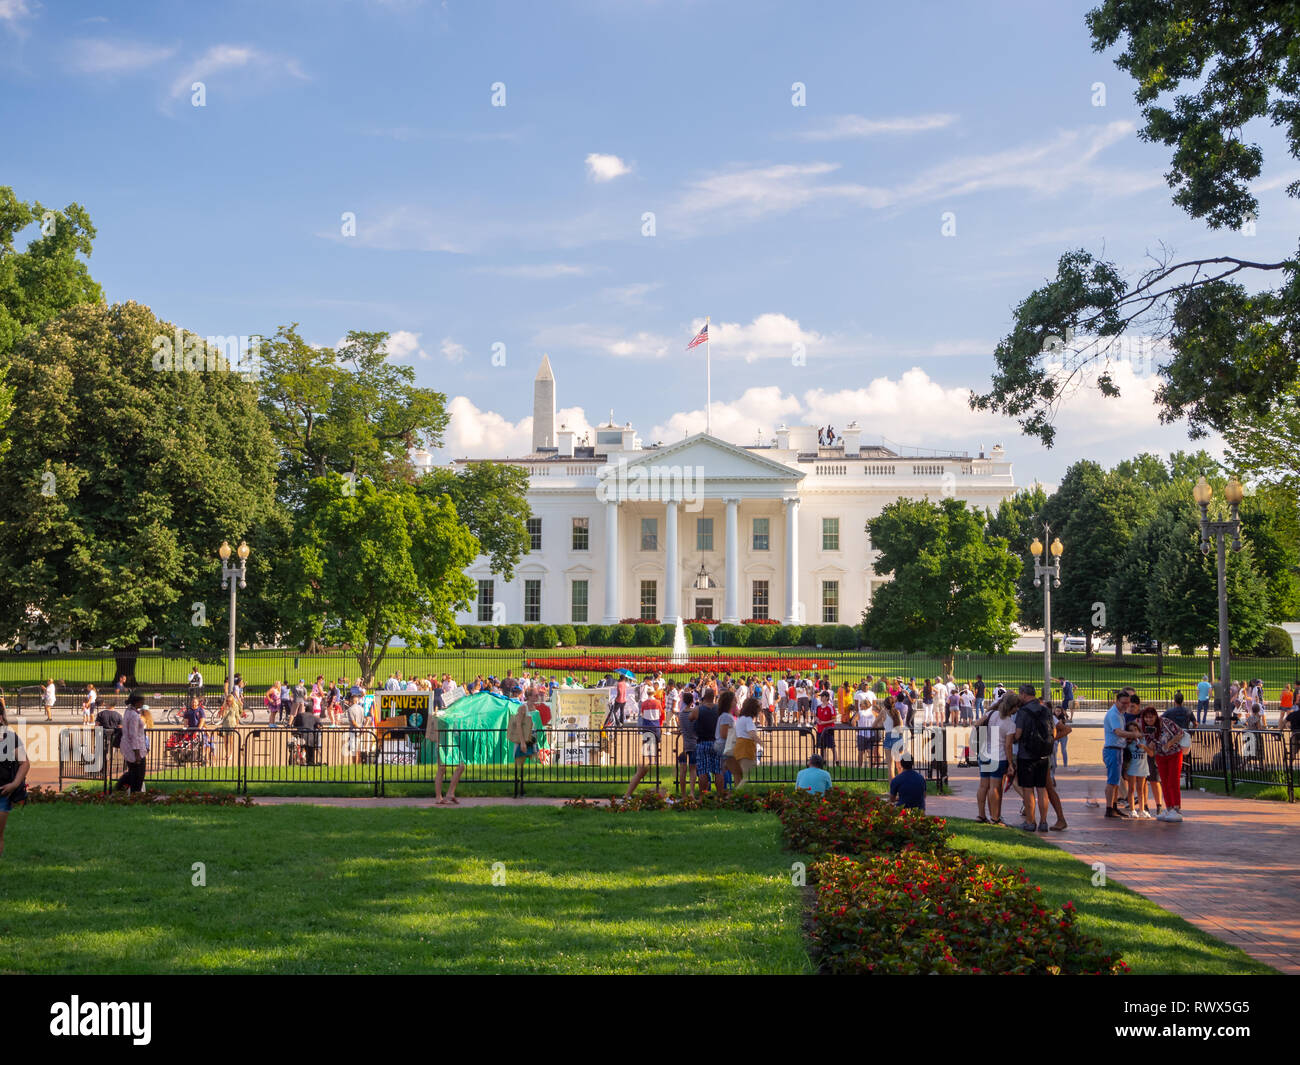 Washington DC, District of Columbia, Summer 2018 [United States US White House, lawn and garden behind the fence, touritst visitors in the street] Stock Photo